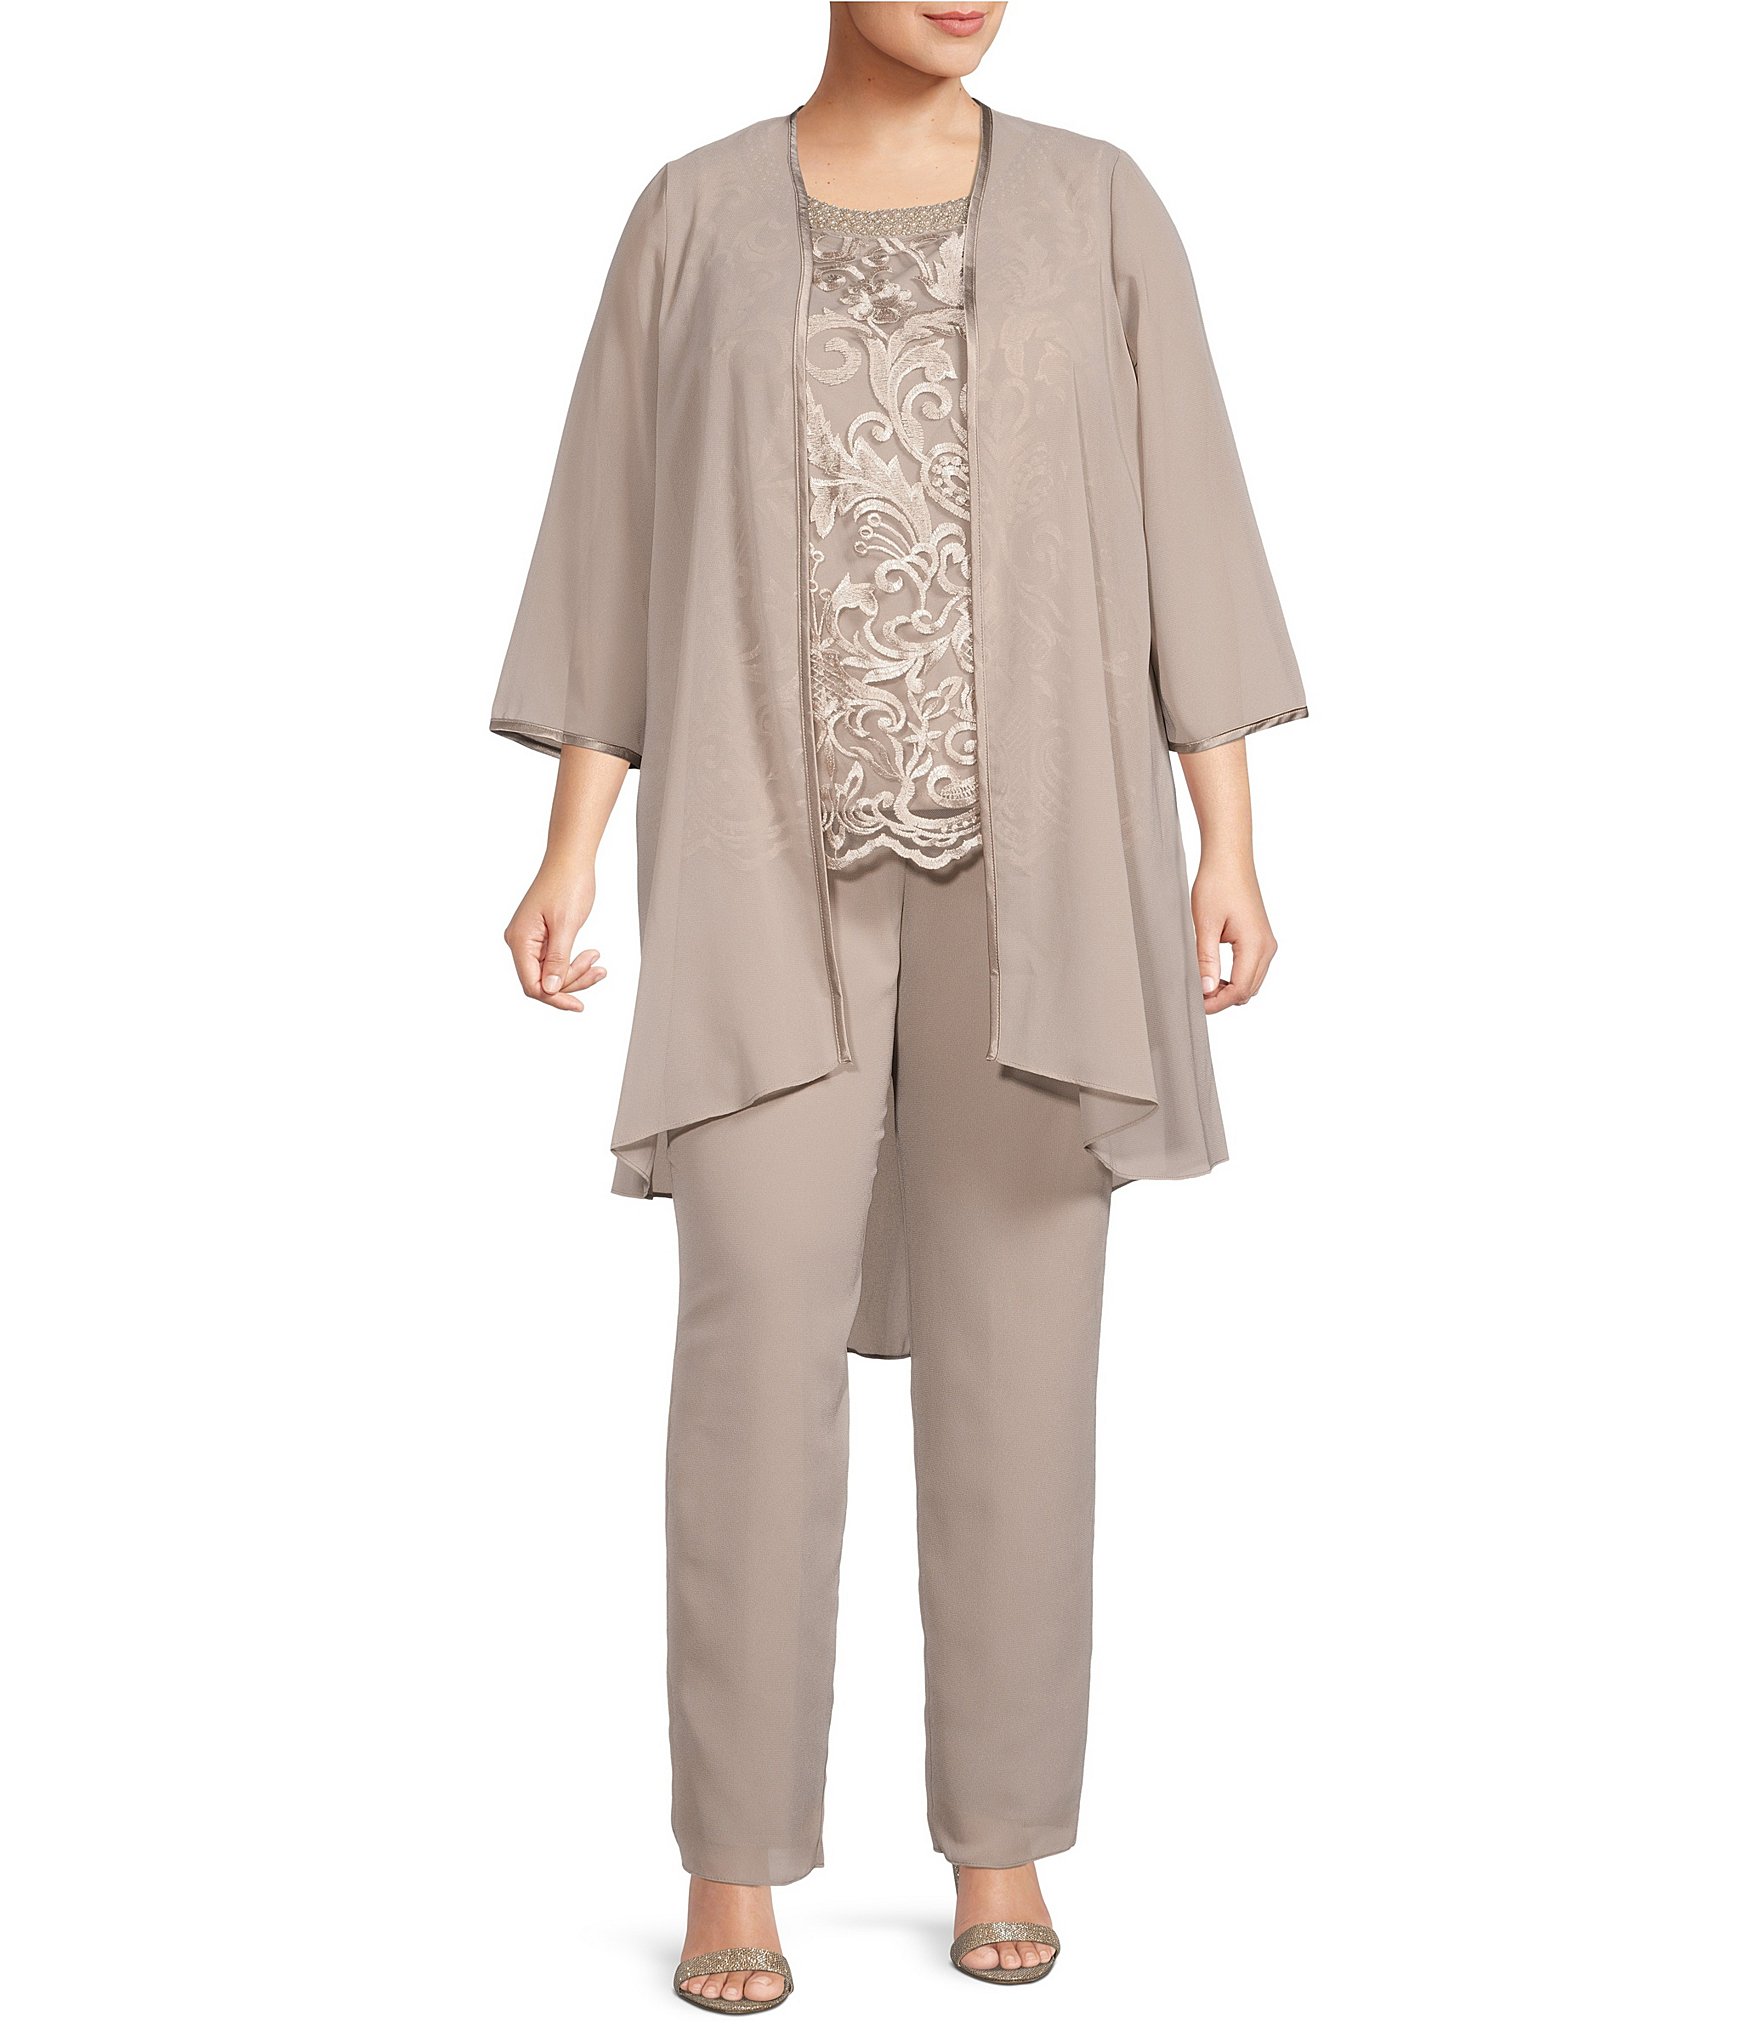 https://dimg.dillards.com/is/image/DillardsZoom/zoom/le-bos-plus-size-embroidered-georgette-3-piece-duster-pant-set/00000000_zi_5cc373a1-80a4-451a-a2cf-9926a2eea0d9.jpg